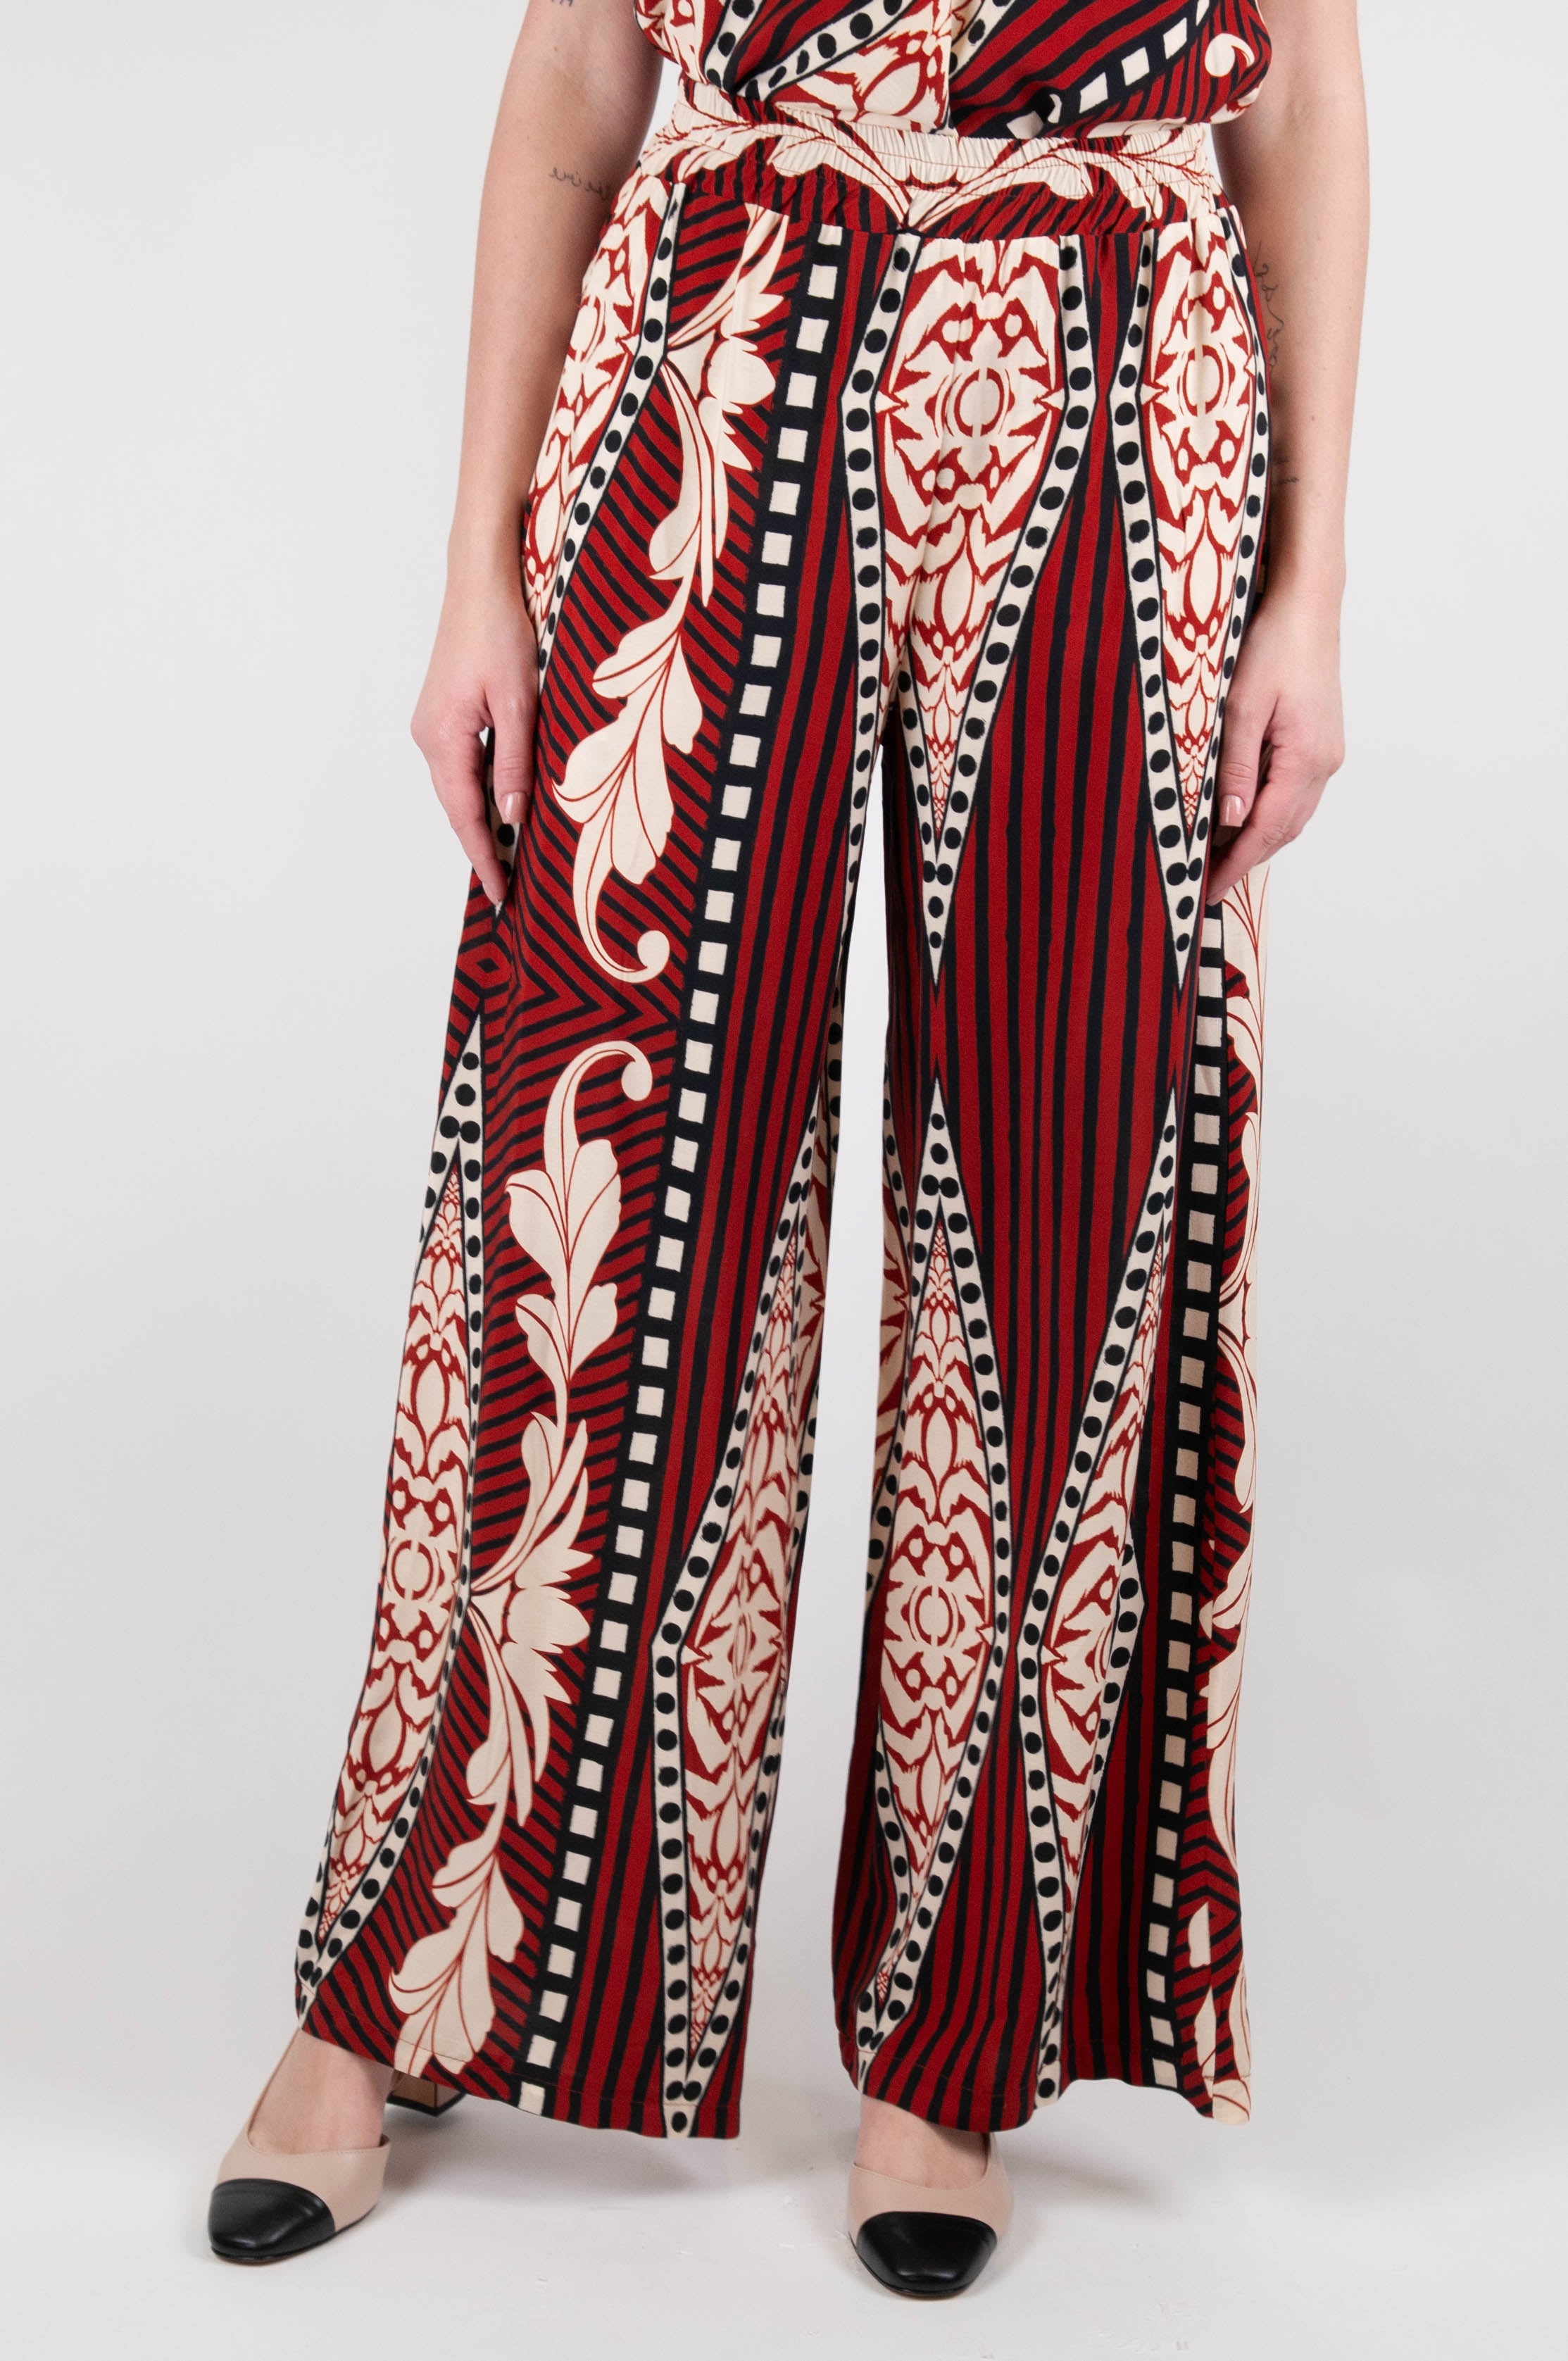 Haveone - Ethnic patterned palazzo trousers in viscose with elastic waist